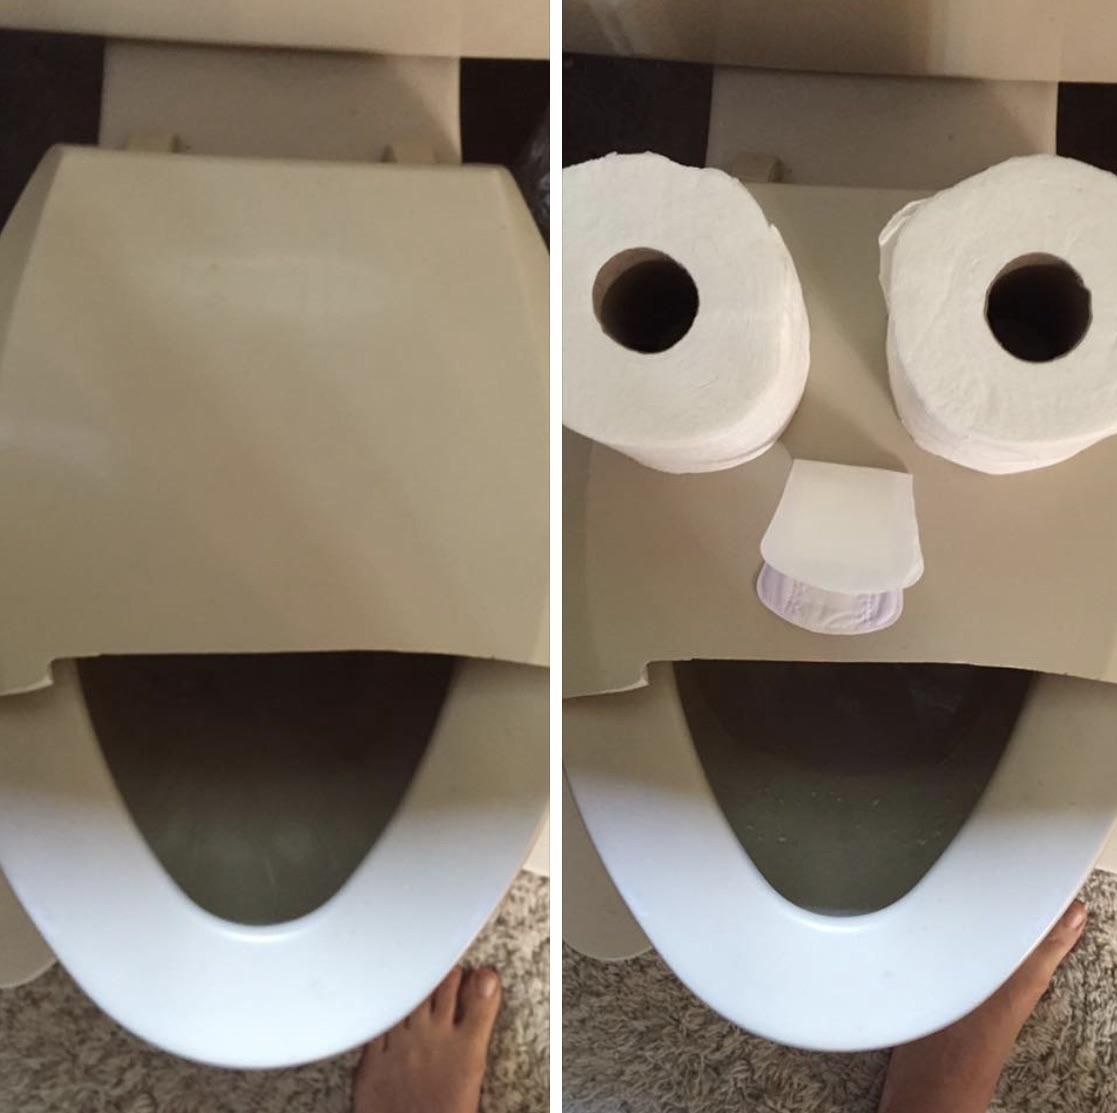 I broke the toilet seat. This is how I broke it to my wife . . .